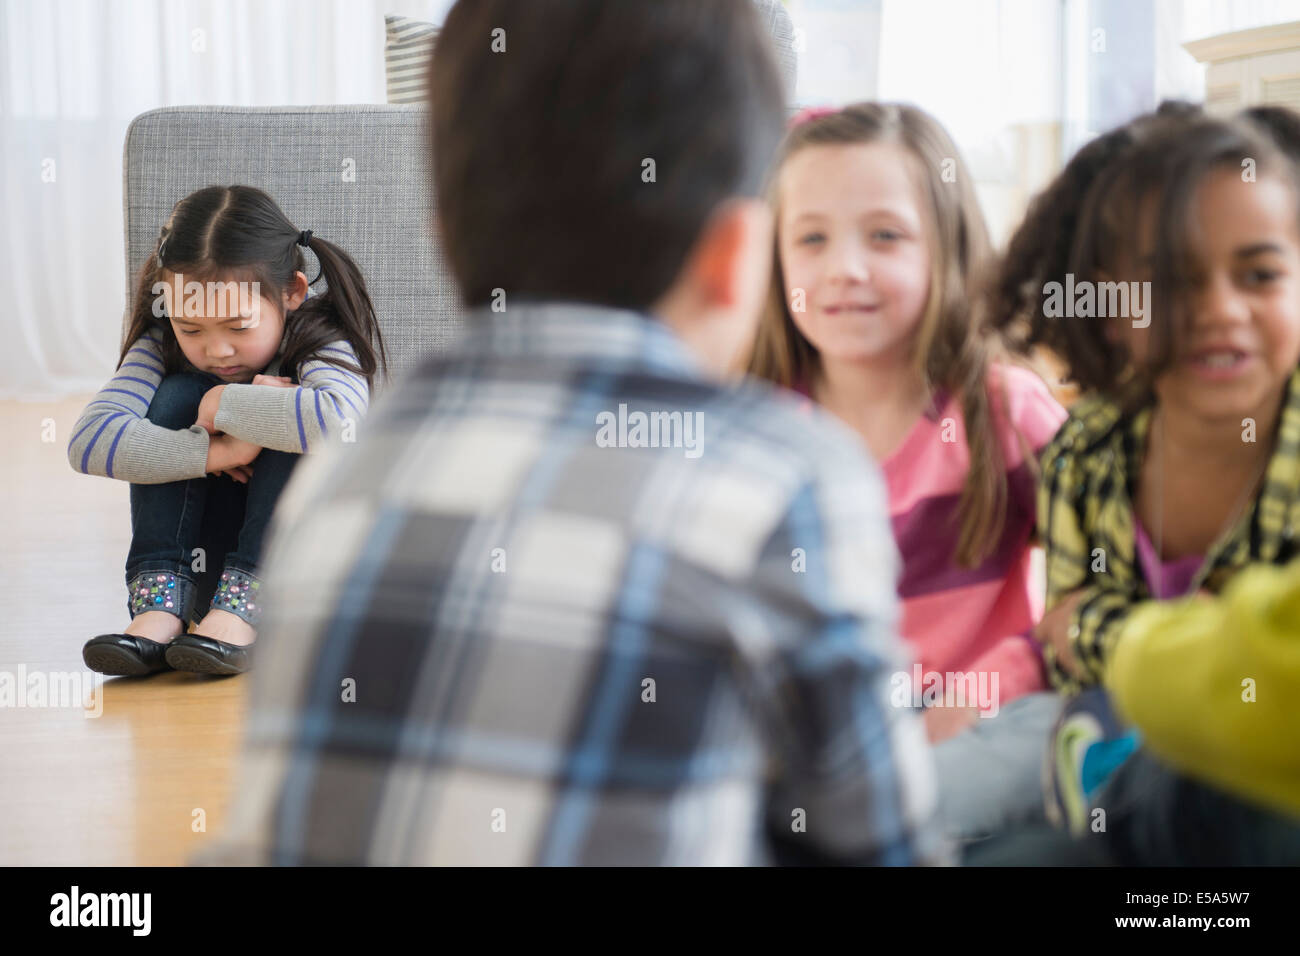 Children excluding girl in group Stock Photo